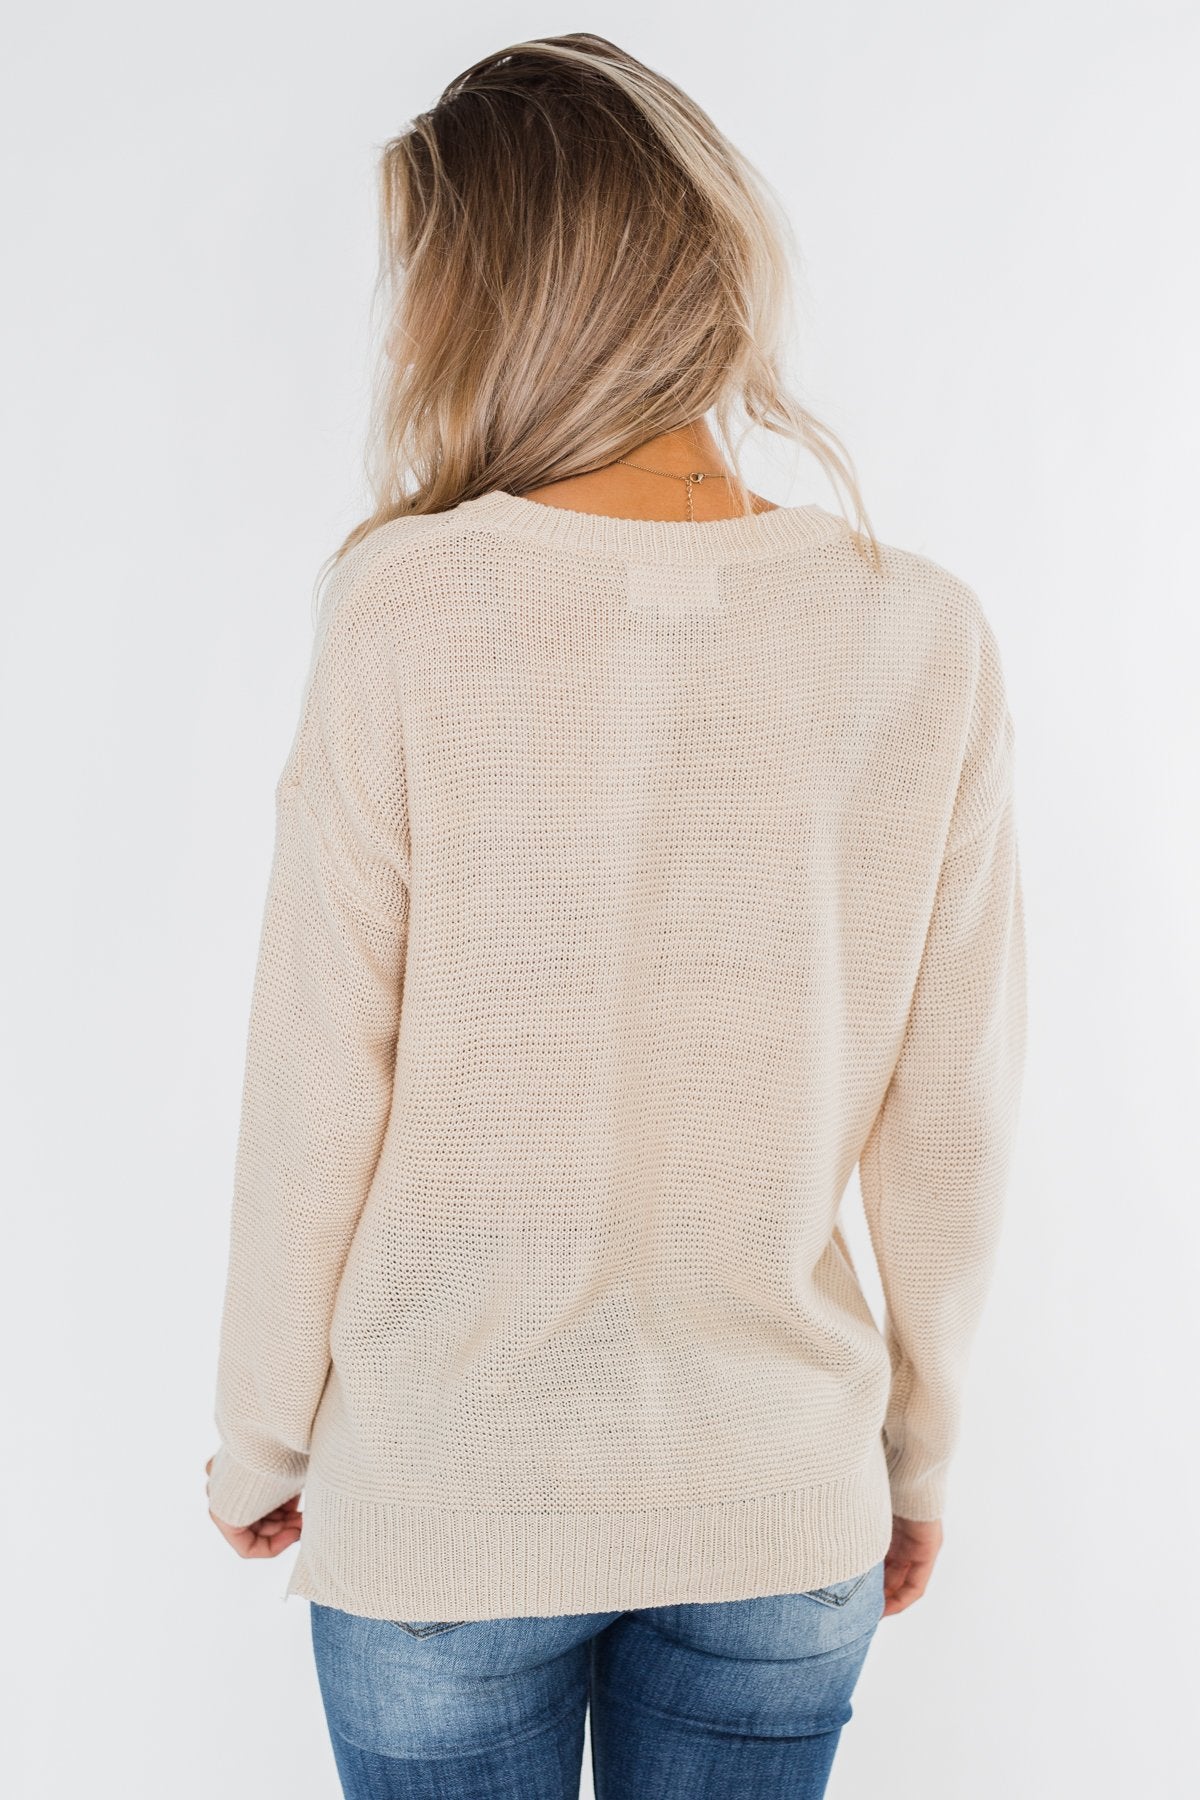 Today Is The Day Knit Sweater- Cream